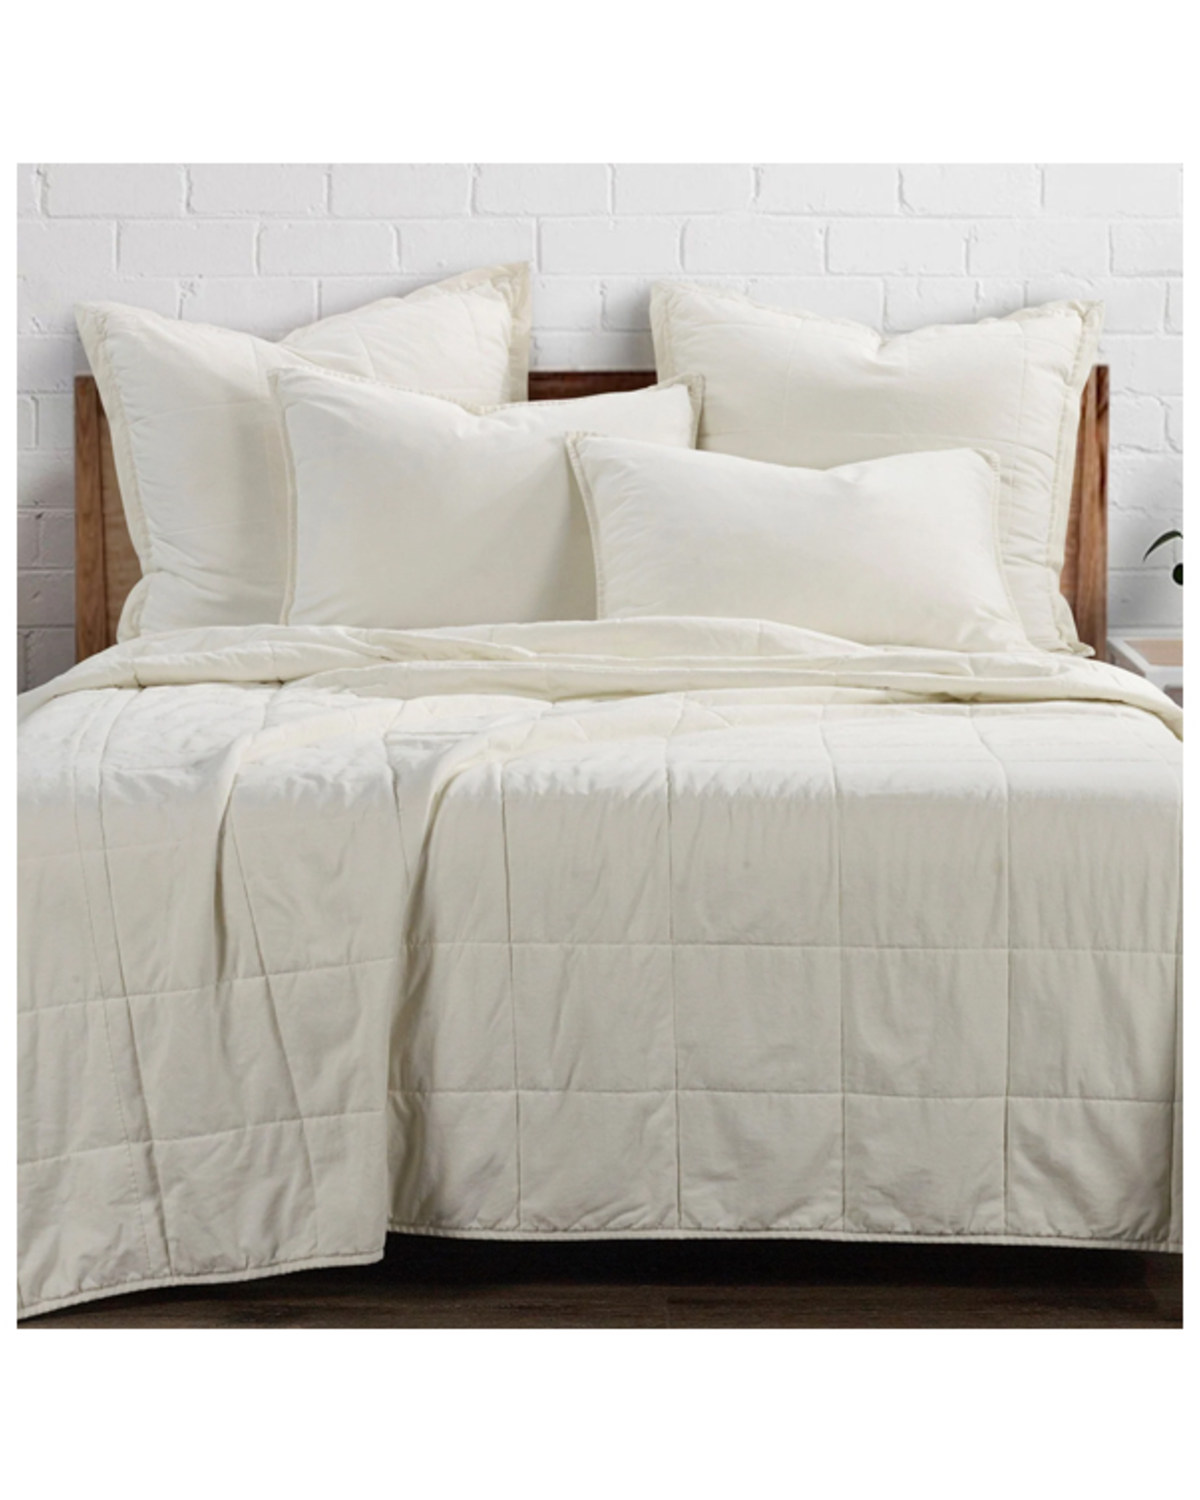 HiEnd Accents Natural Stonewashed Cotton Canvas King Coverlet Set